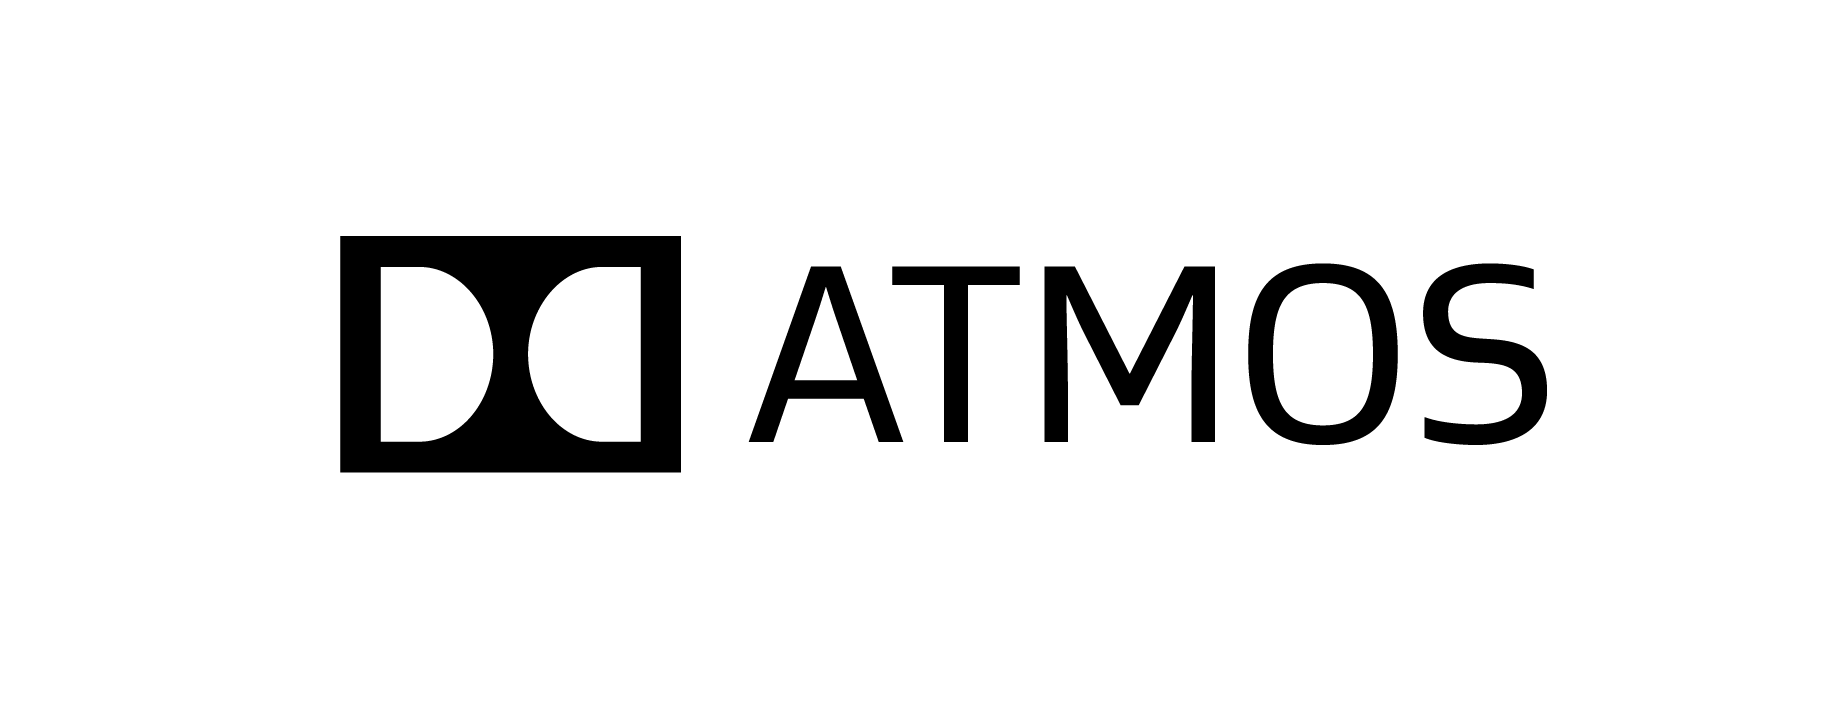 Dolby Atmos Logo - Image - 95-dolby-atmos image.png | Logopedia | FANDOM powered by Wikia